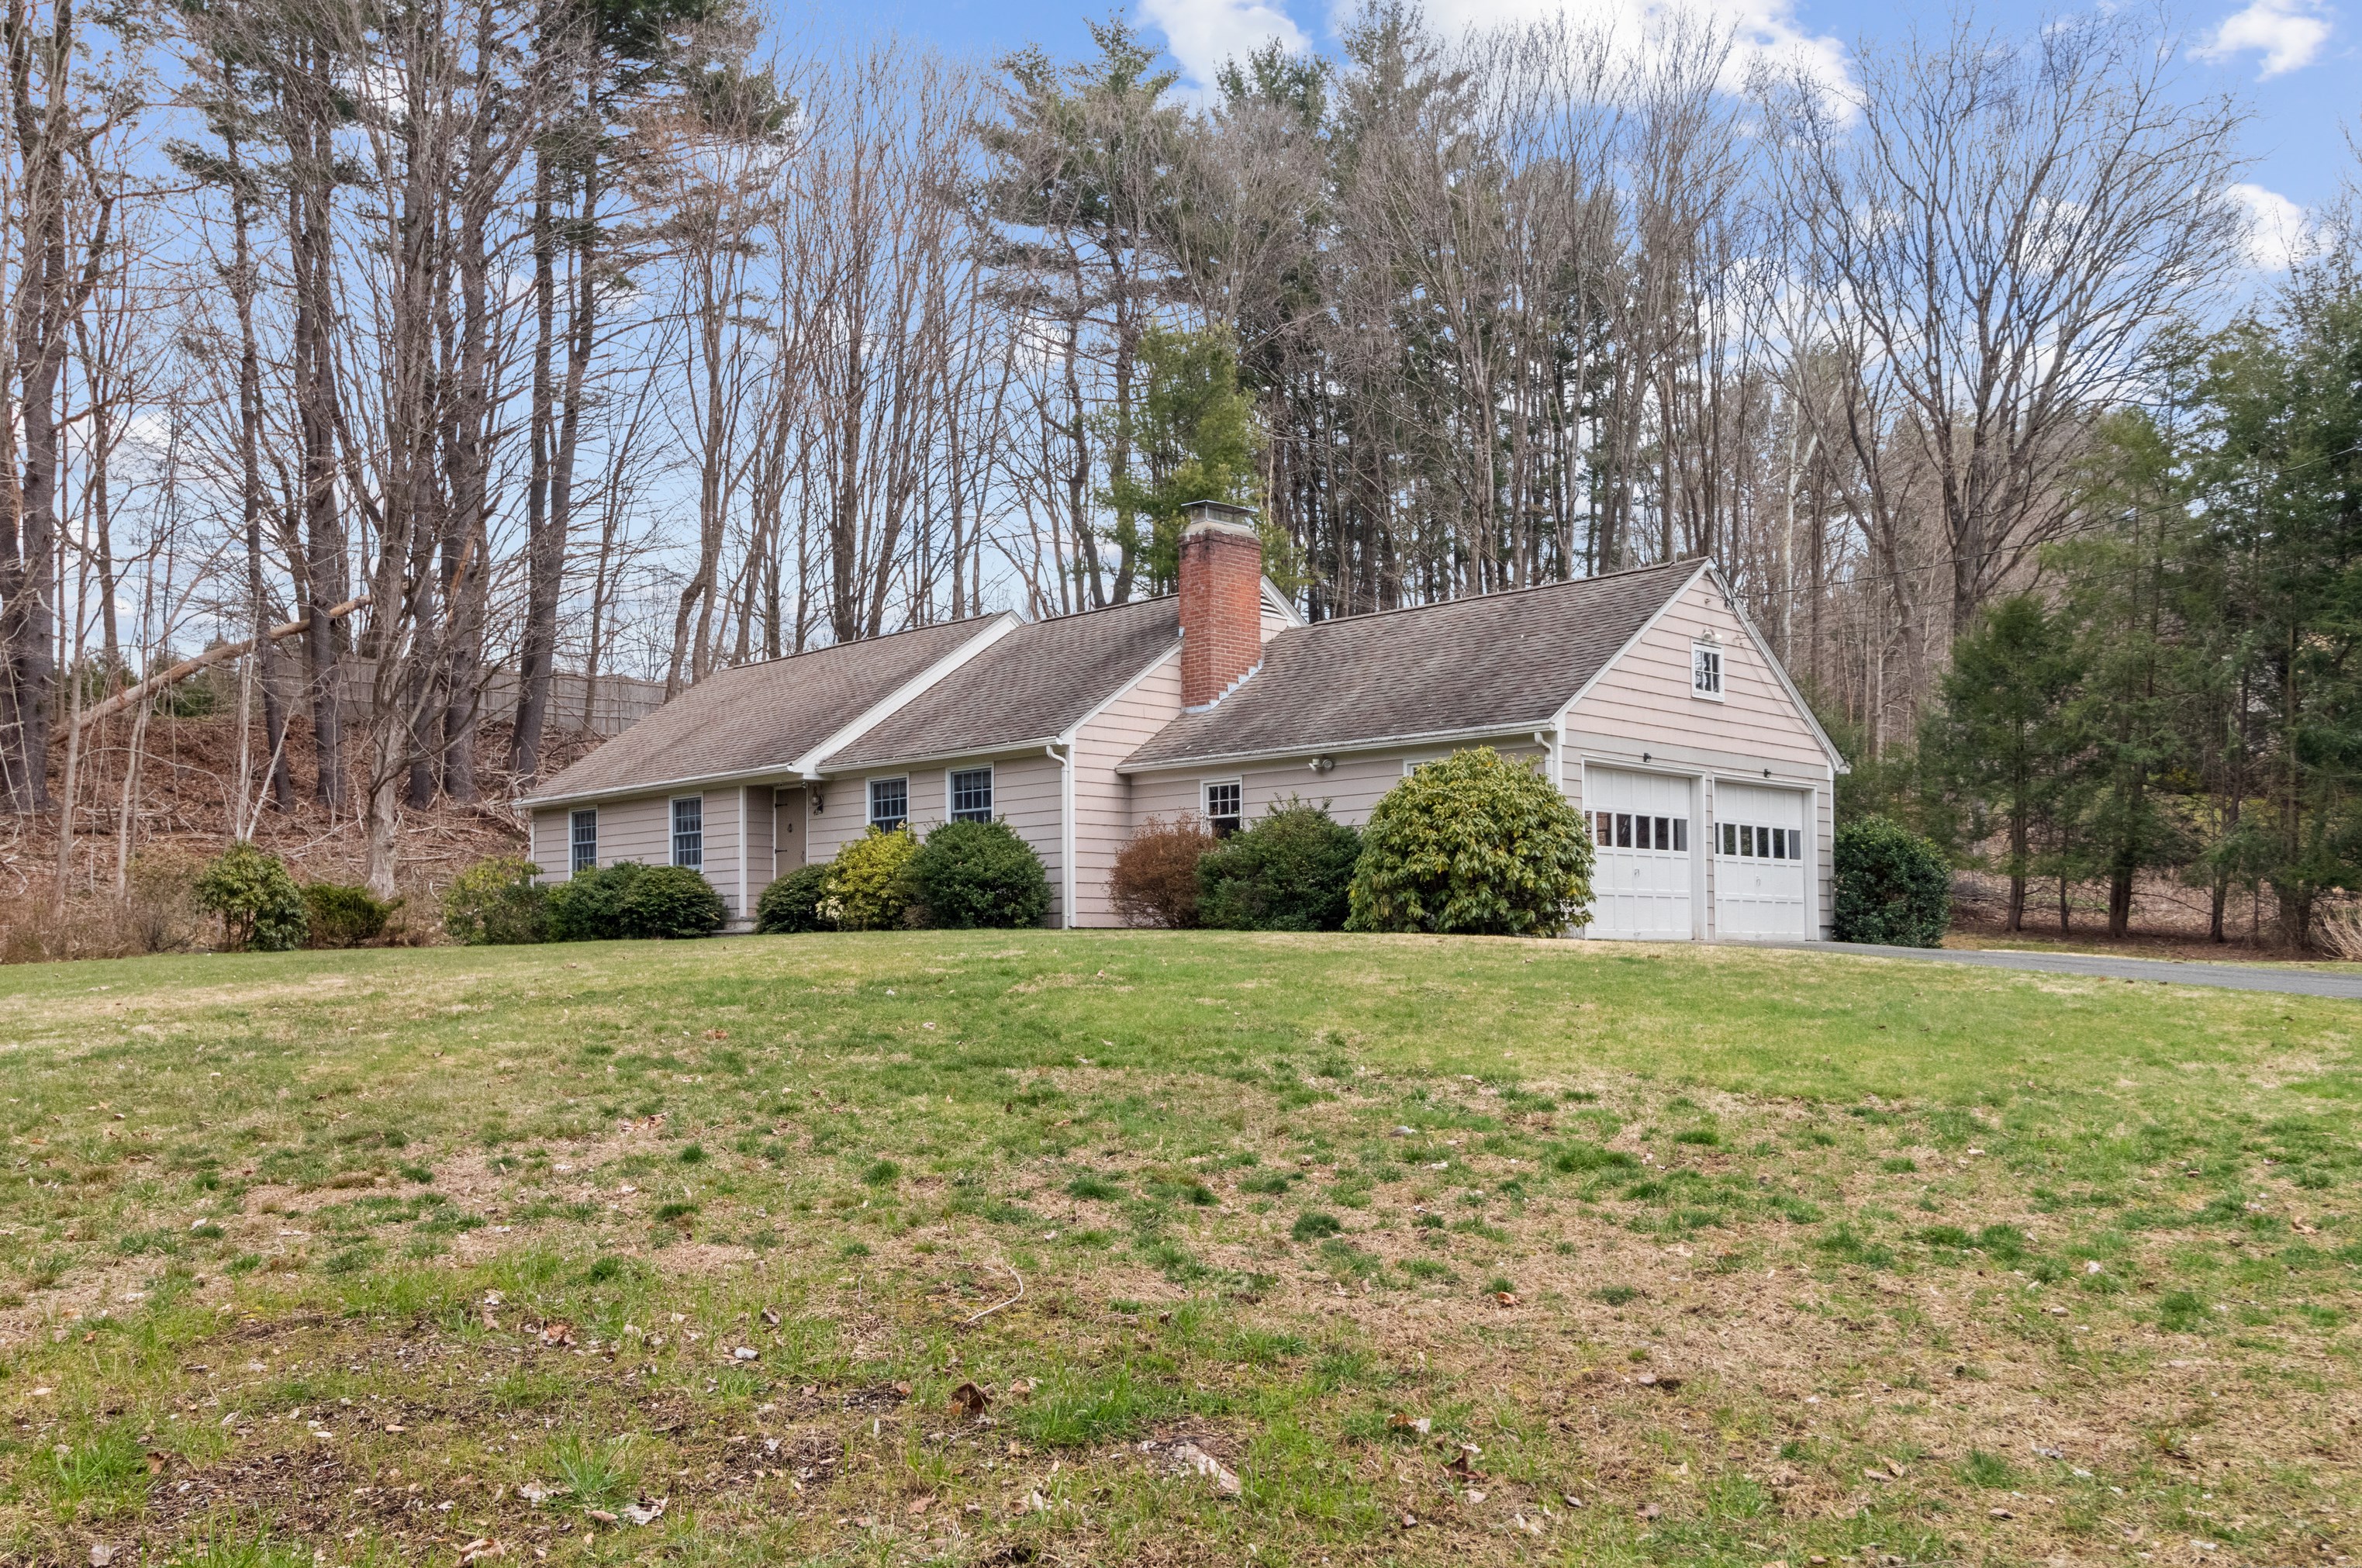 42 Middle Quarter Rd, Woodbury, CT 06798